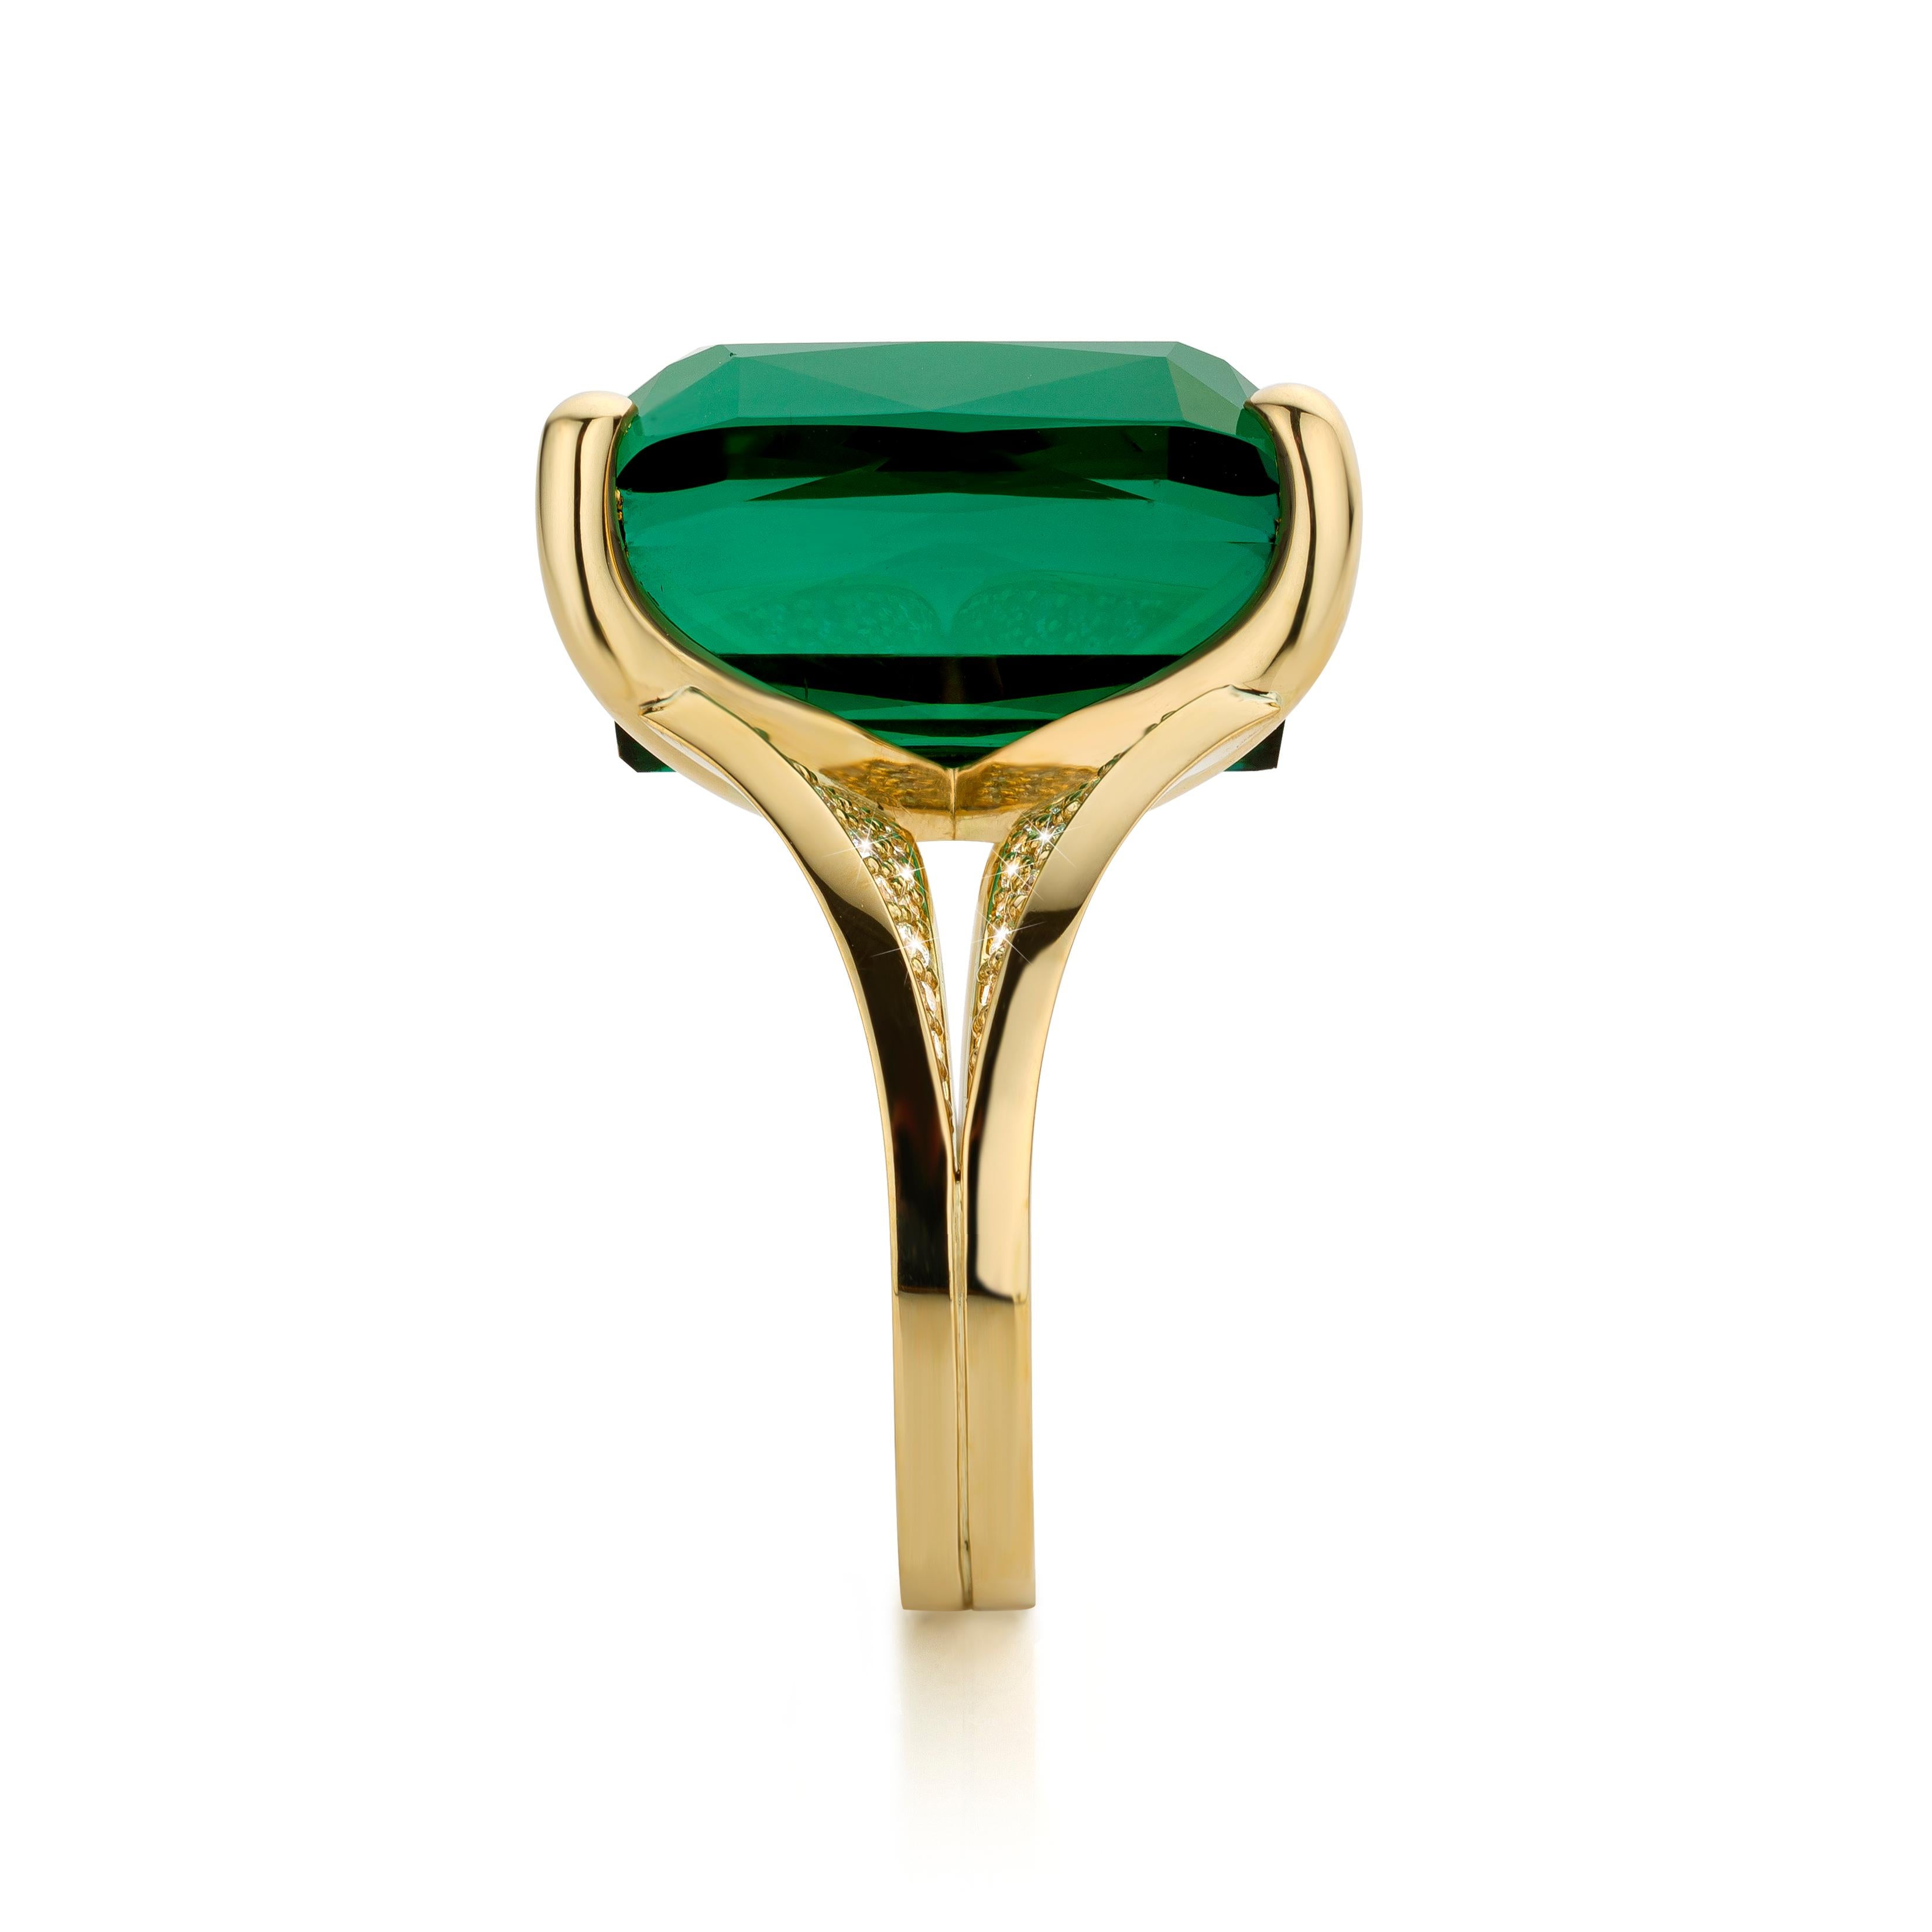 Brilliant Cut Cober “Stunning Green” with a 8.09 Carat Tourmaline and 56 Diamonds Fashion Ring For Sale